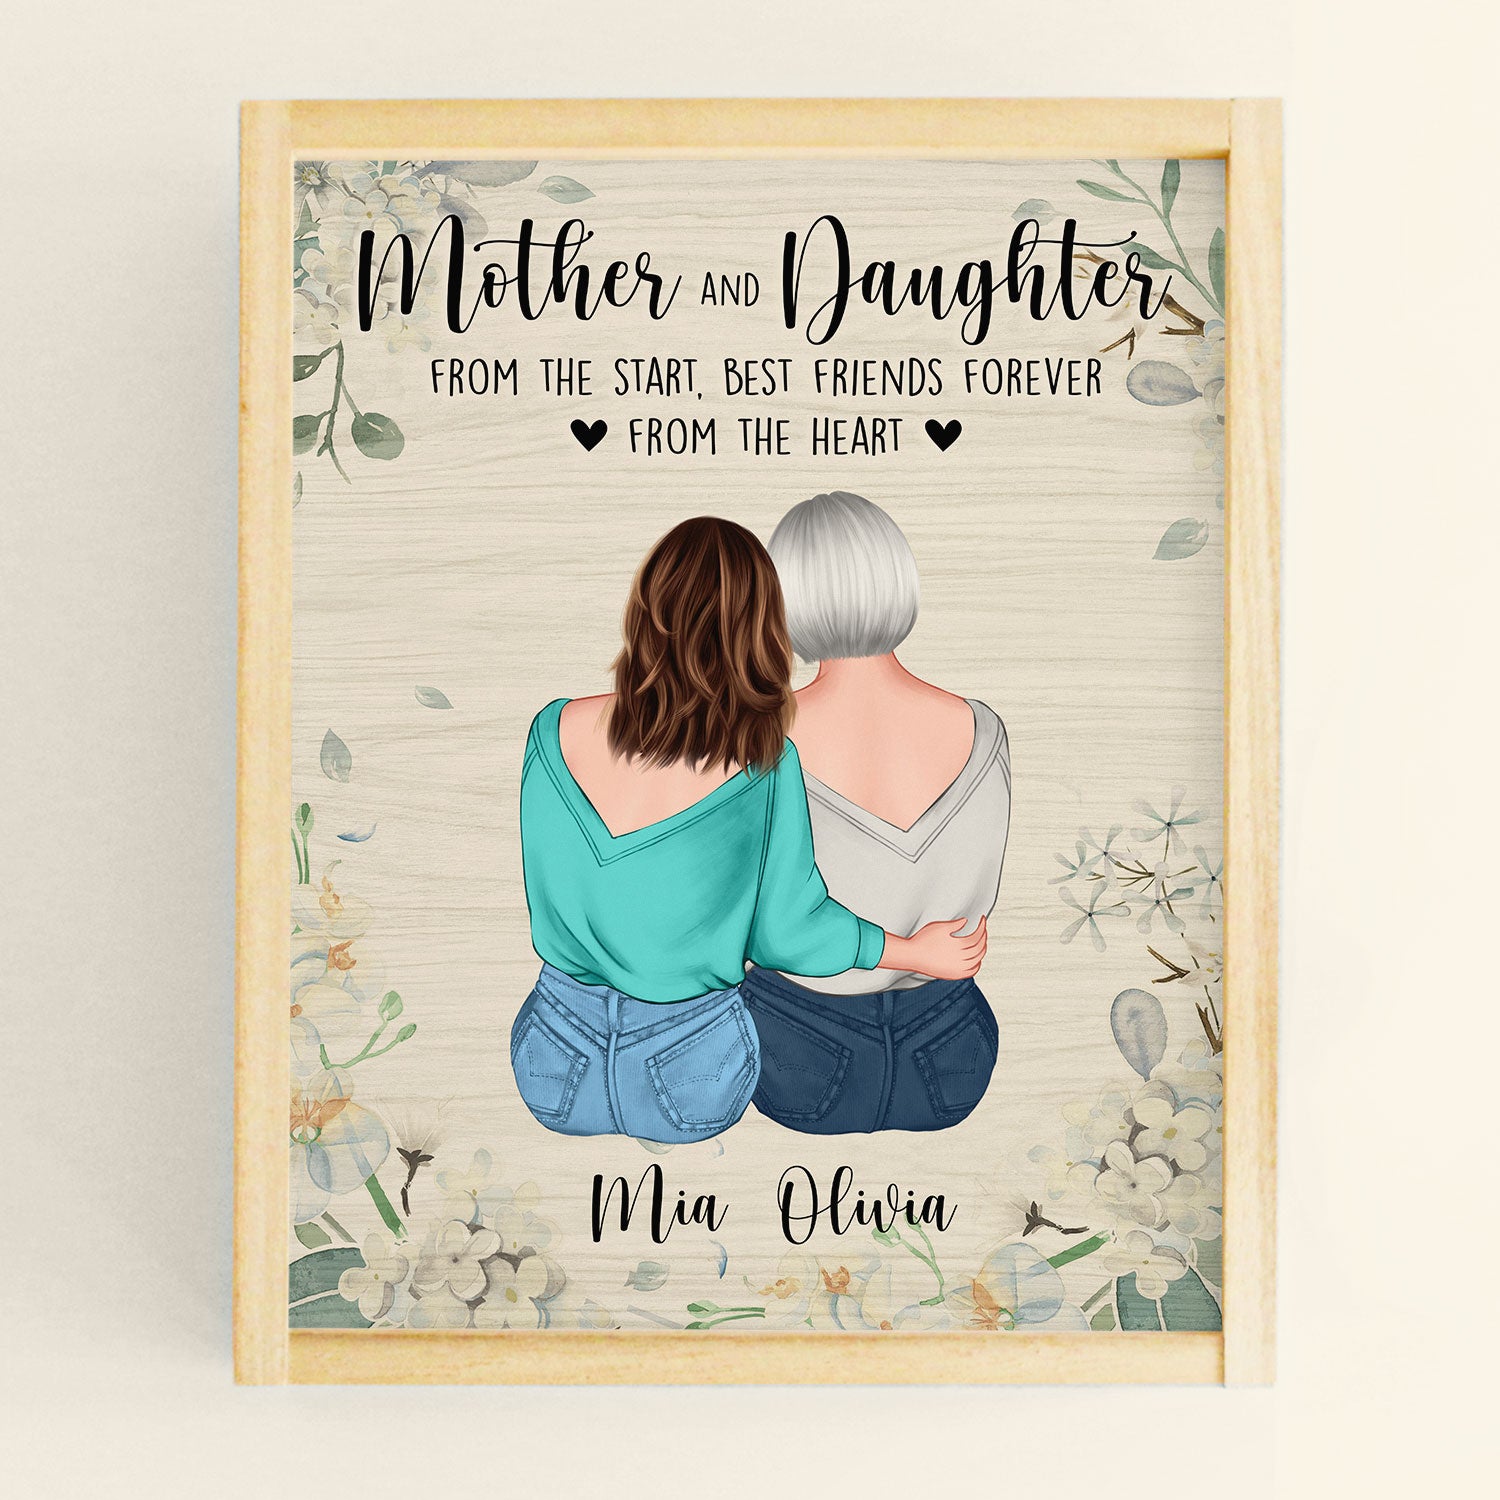 Mother And Daughters From The Start - Personalized Poster - Birthday, Mother's Day Gift For Mothers, Grandmas, Daughters 